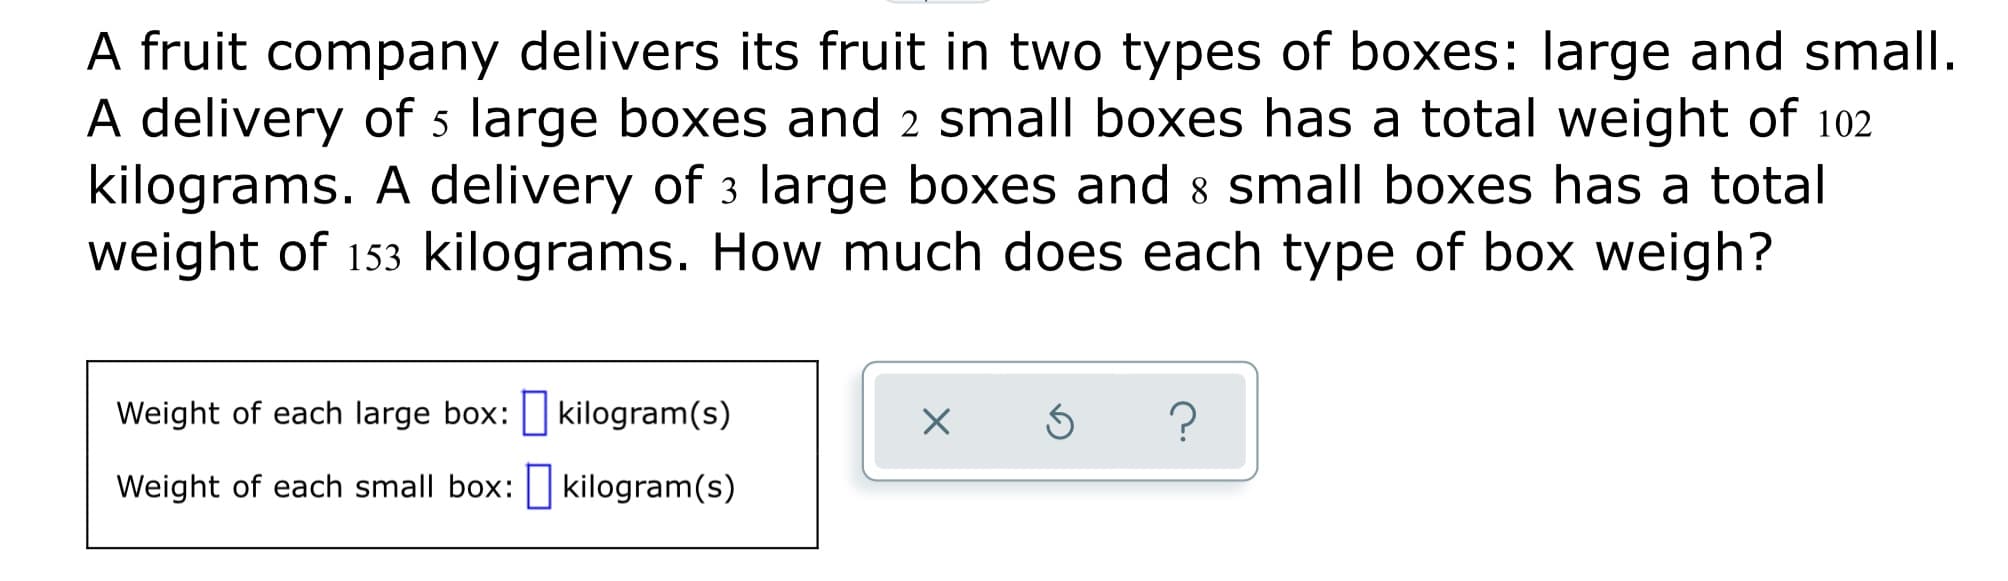 A fruit company delivers its fruit in two types of boxes: large and small.
A delivery of 5 large boxes and 2 small boxes has a total weight of 102
kilograms. A delivery of 3 large boxes and 8 small boxes has a total
weight of 153 kilograms. How much does each type of box weigh?
Weight of each large box: kilogram(s)
Weight of each small box: kilogram(s)
